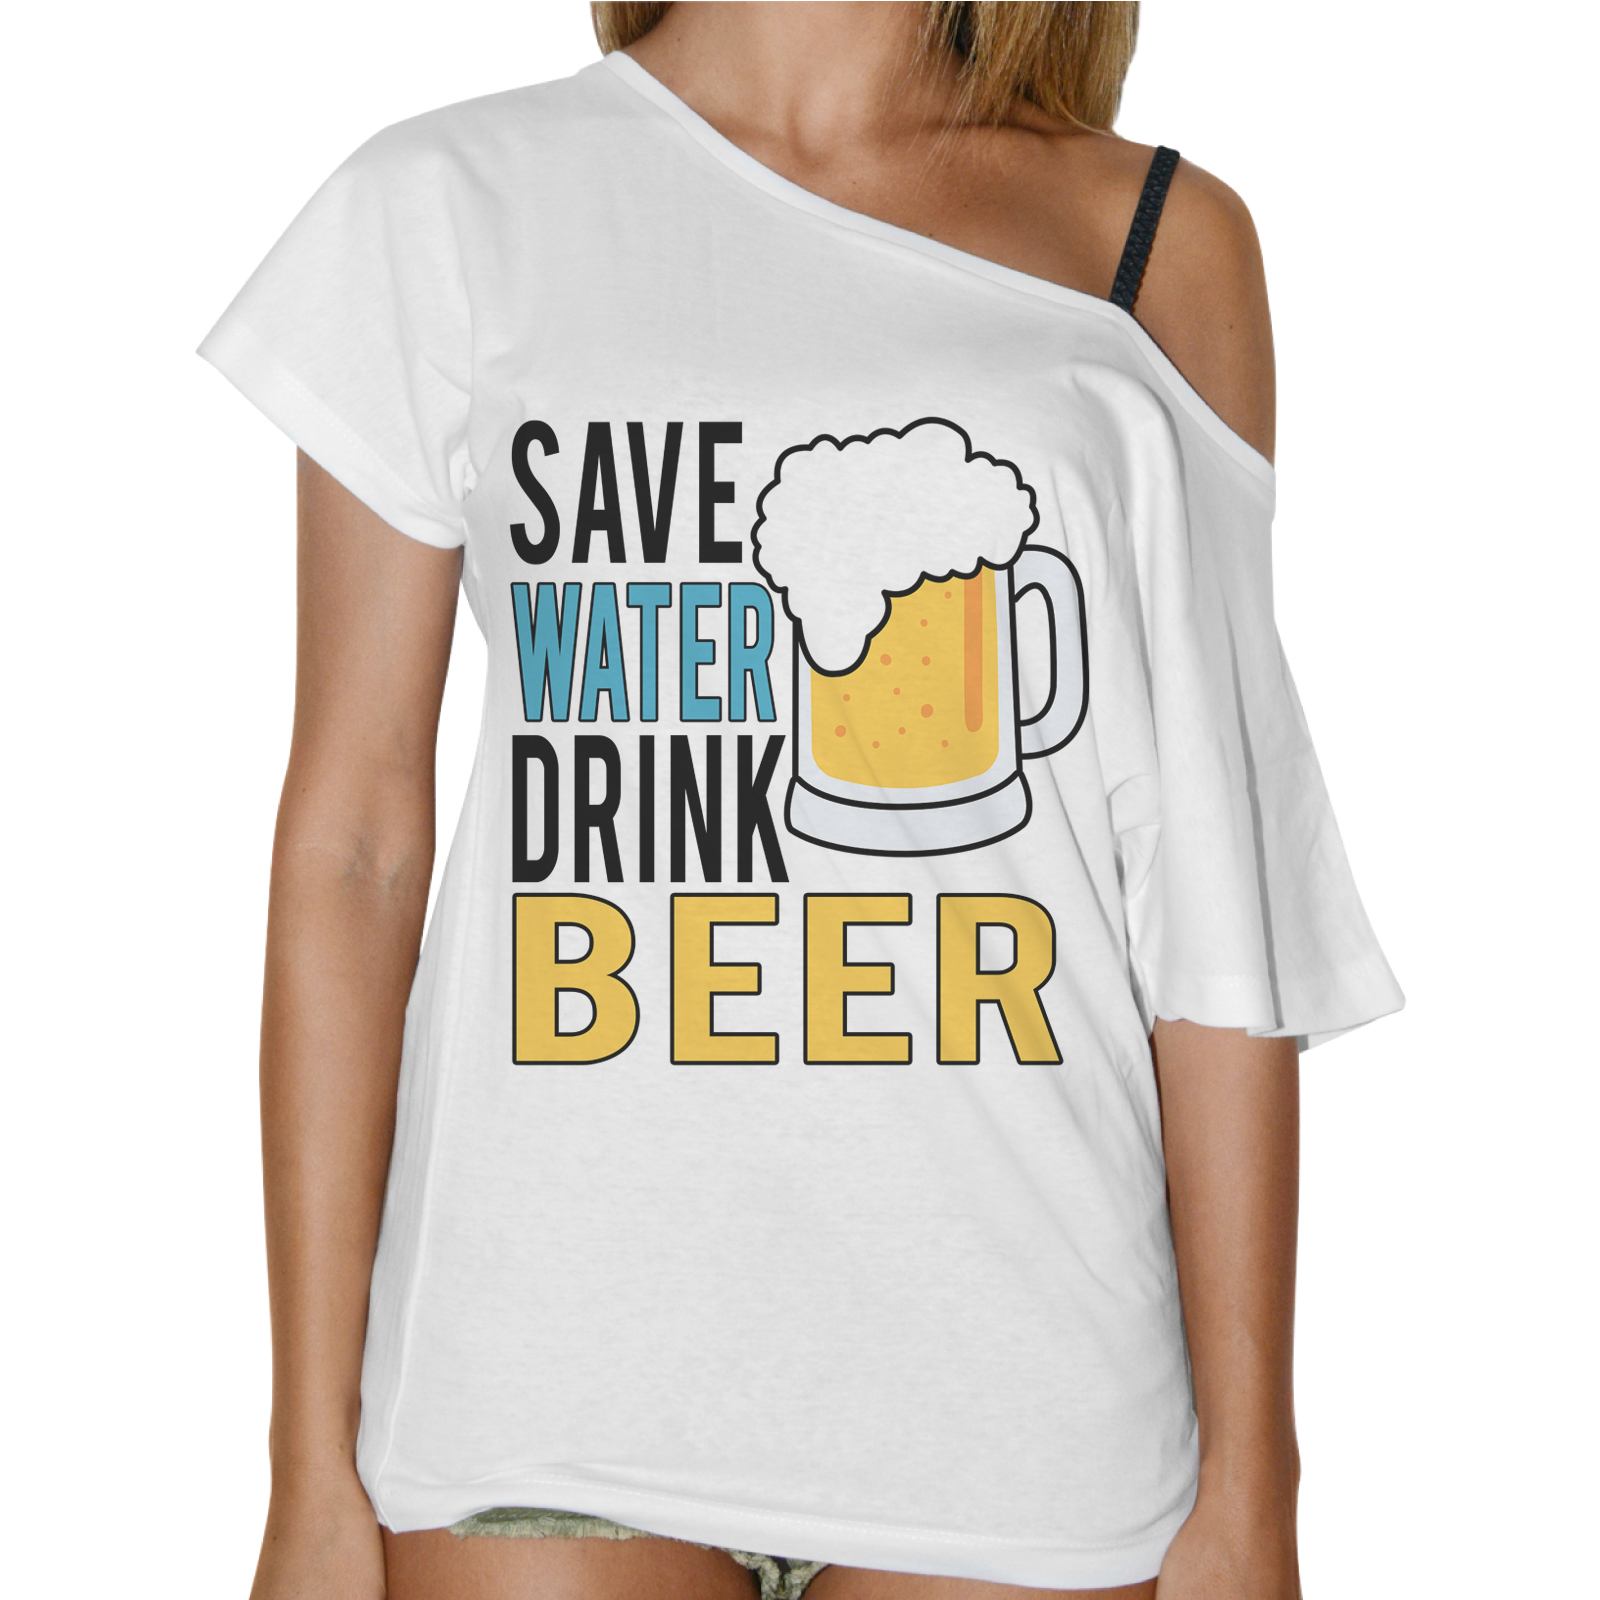 T-Shirt Donna Collo Barca SAVE WATER DRINK BEER